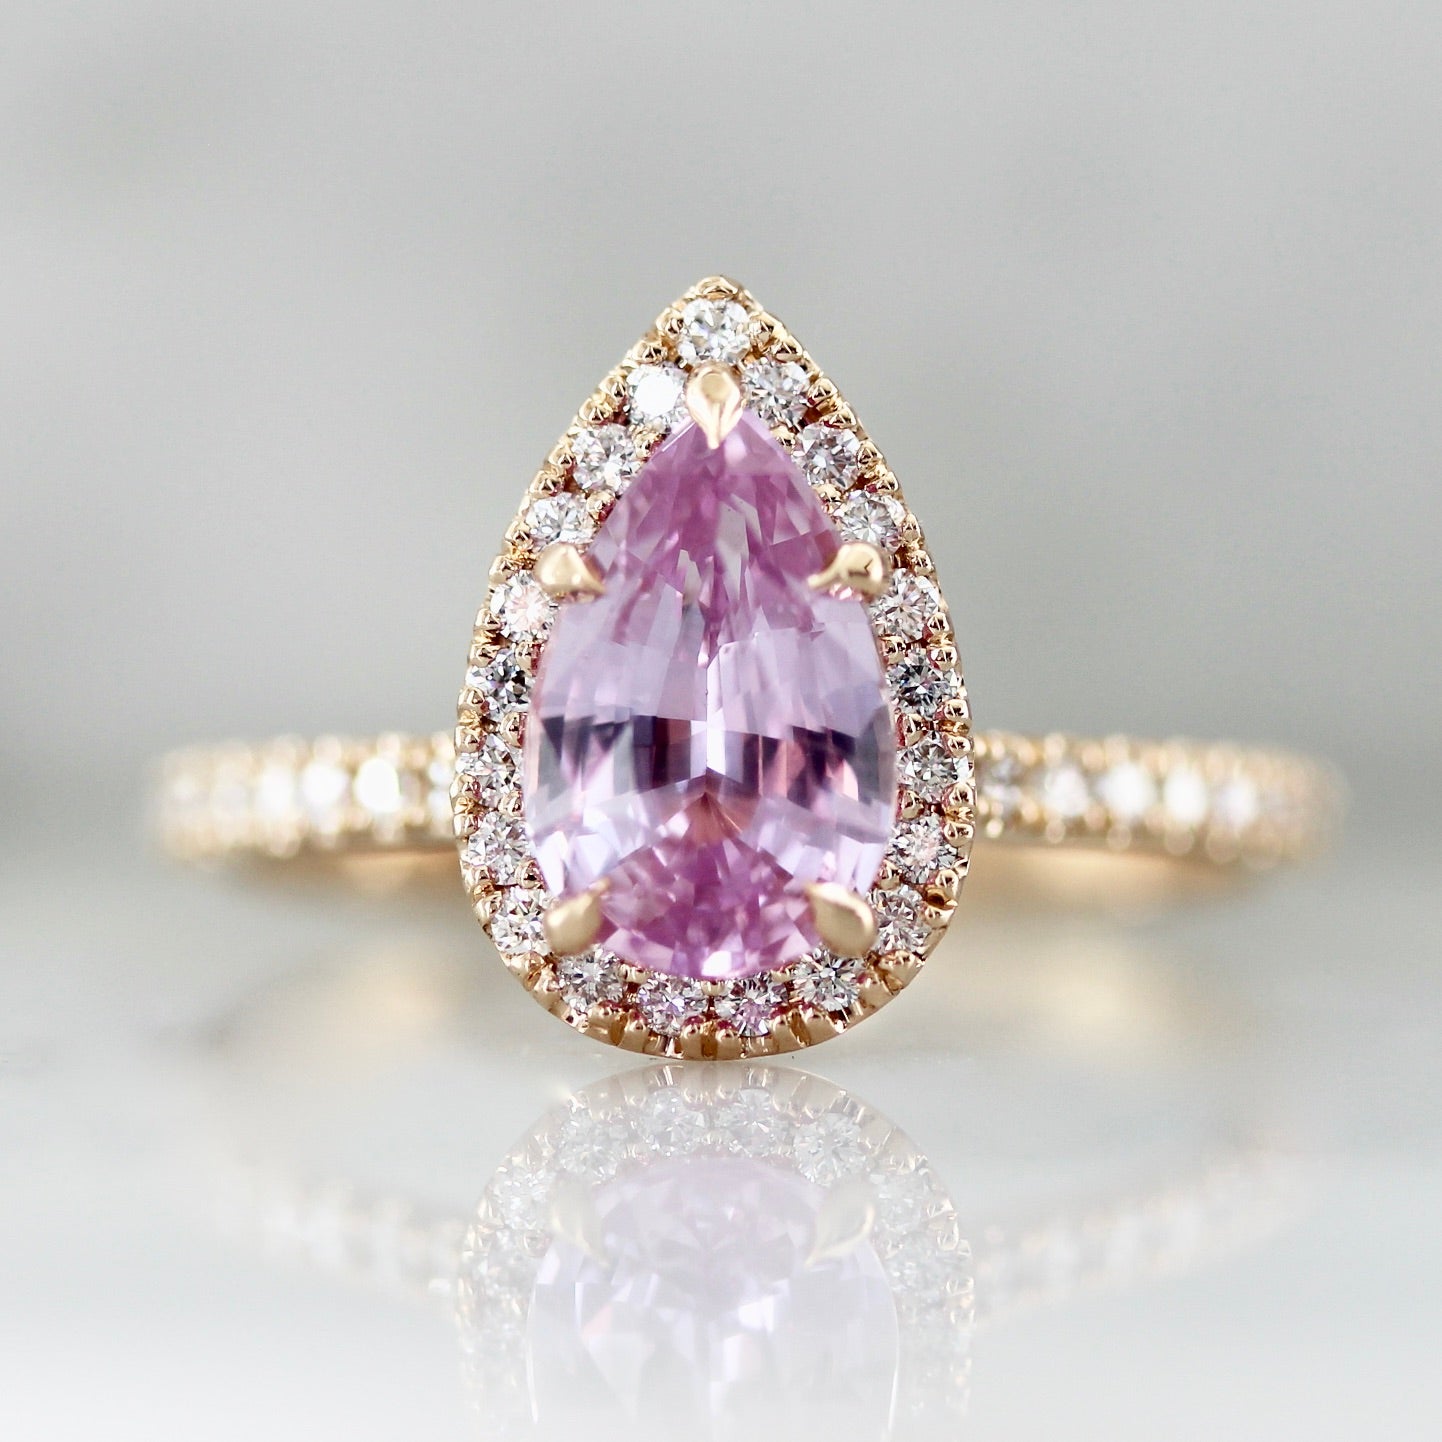 5175 - Pink Sapphire with diamond halo in peach gold engagement ring